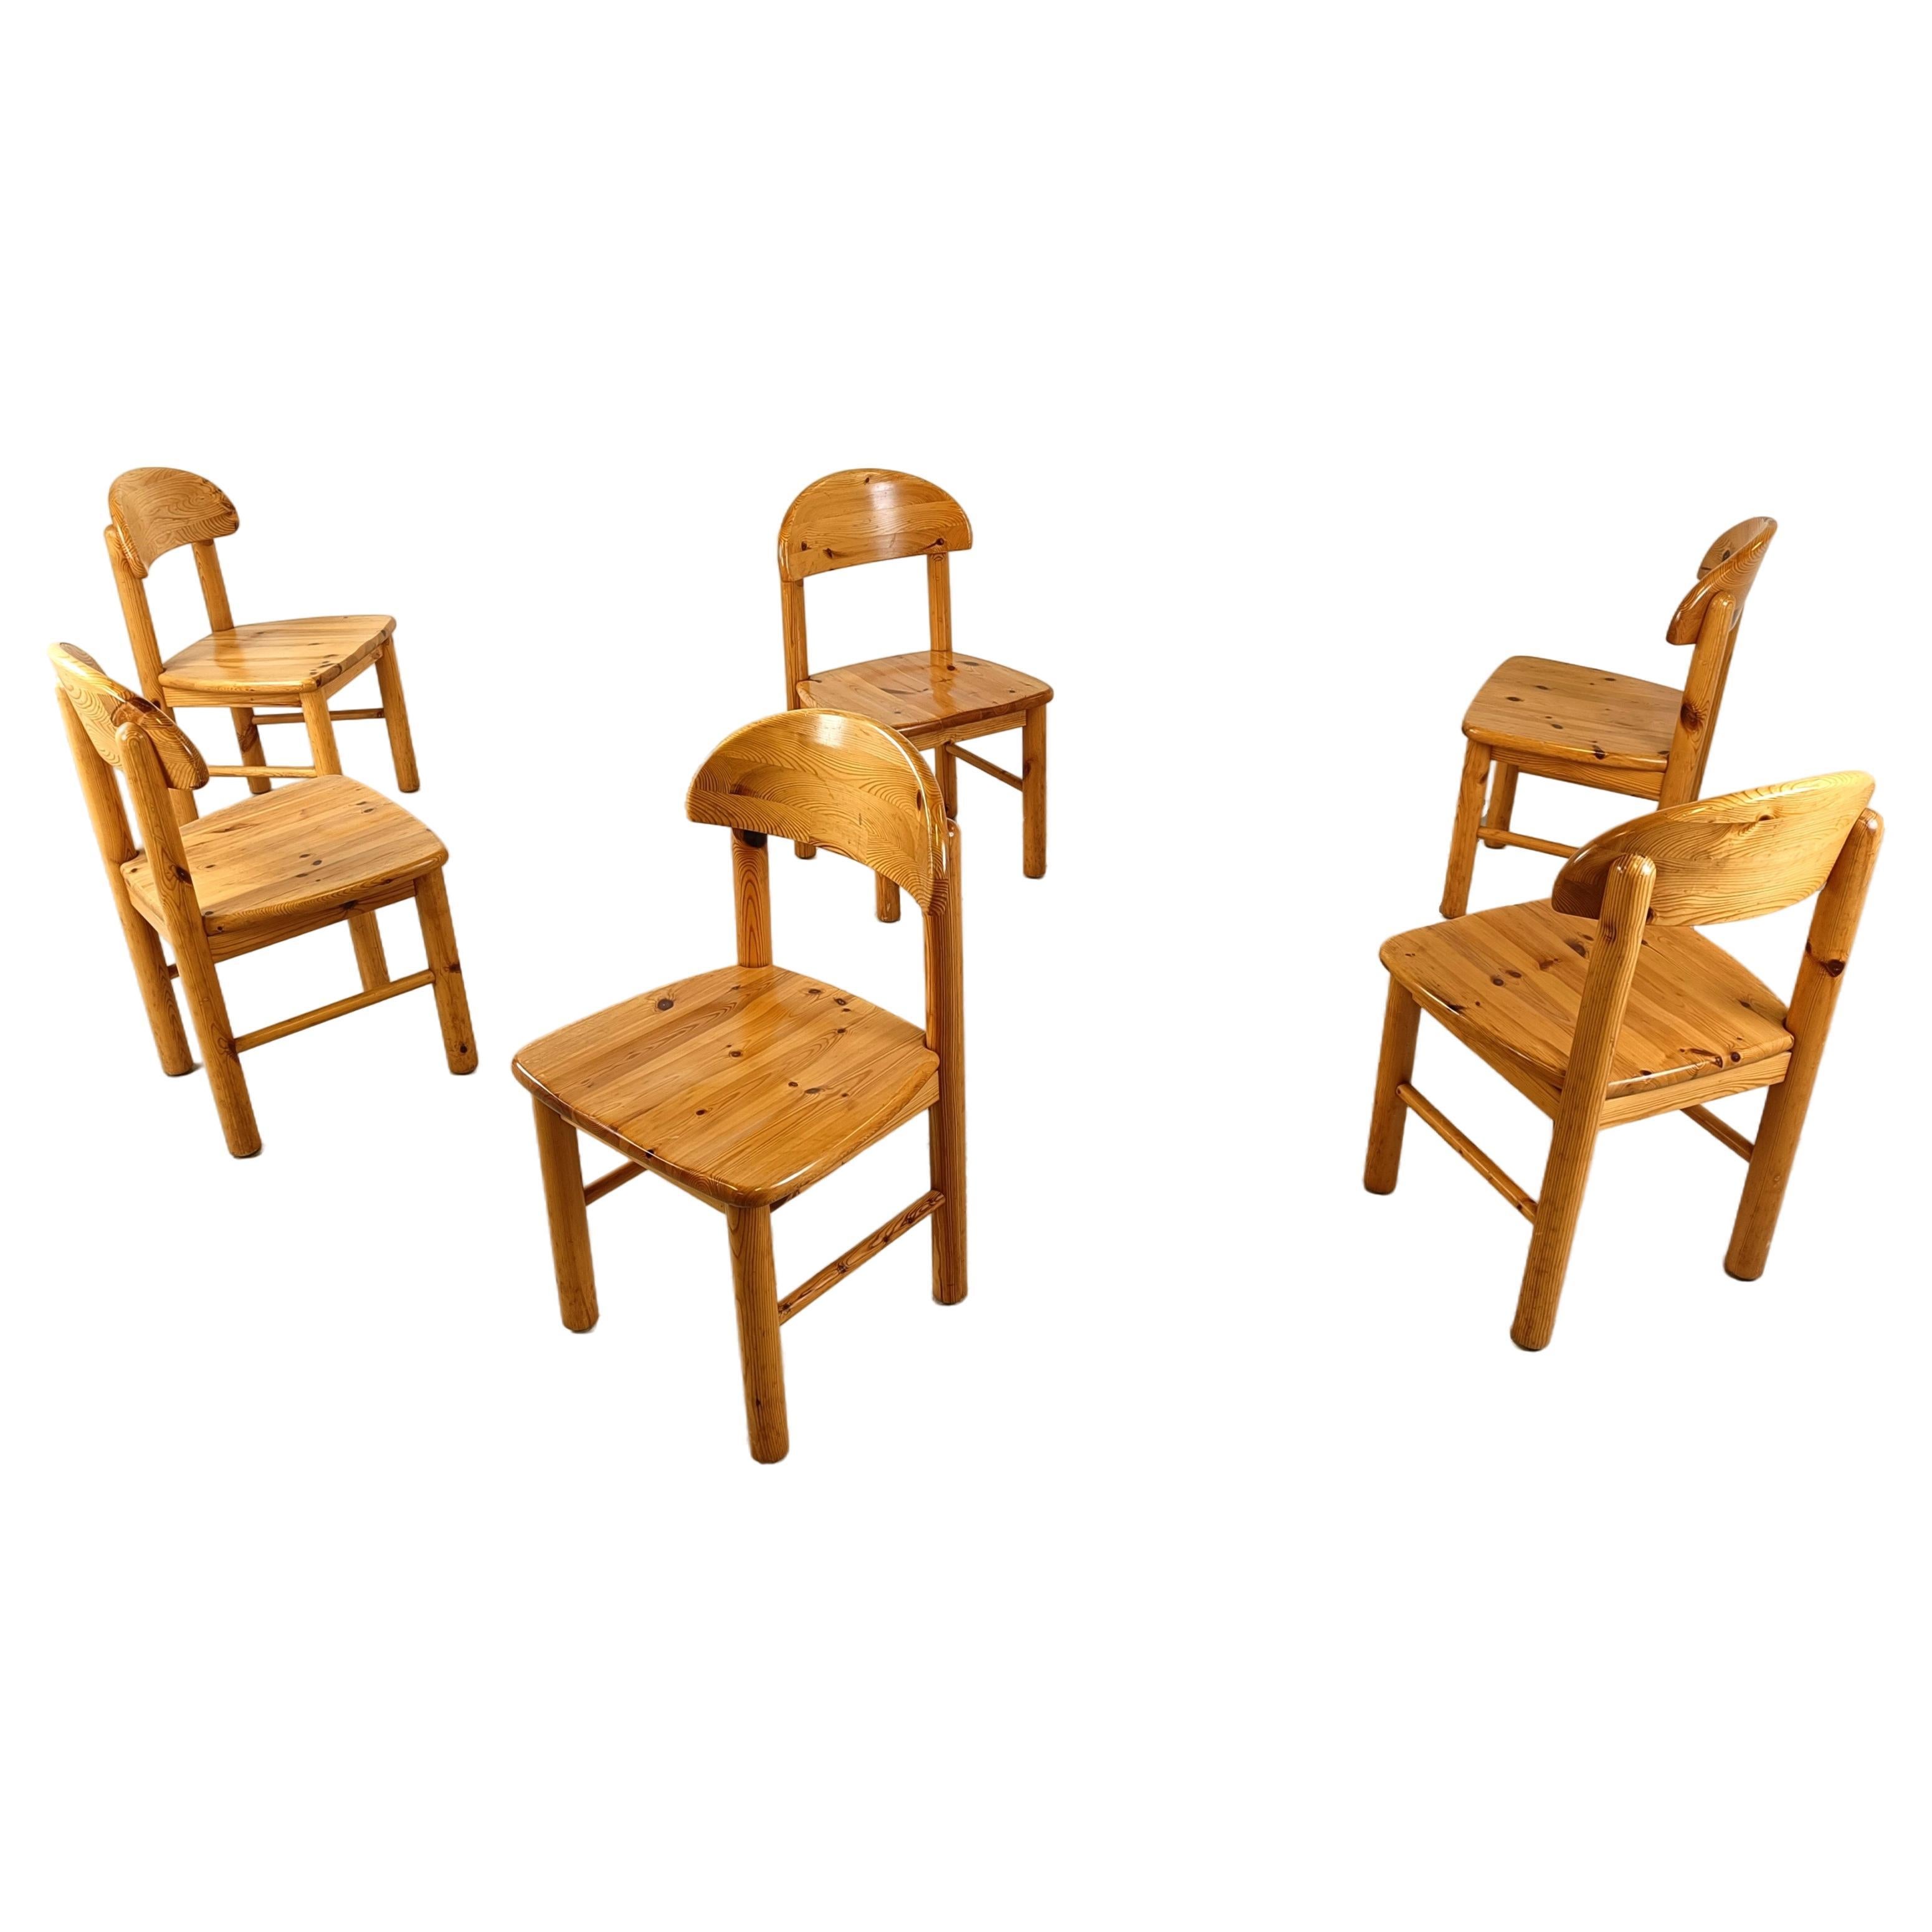 Vintage pine wood dining chairs, 1980s - set of 6 